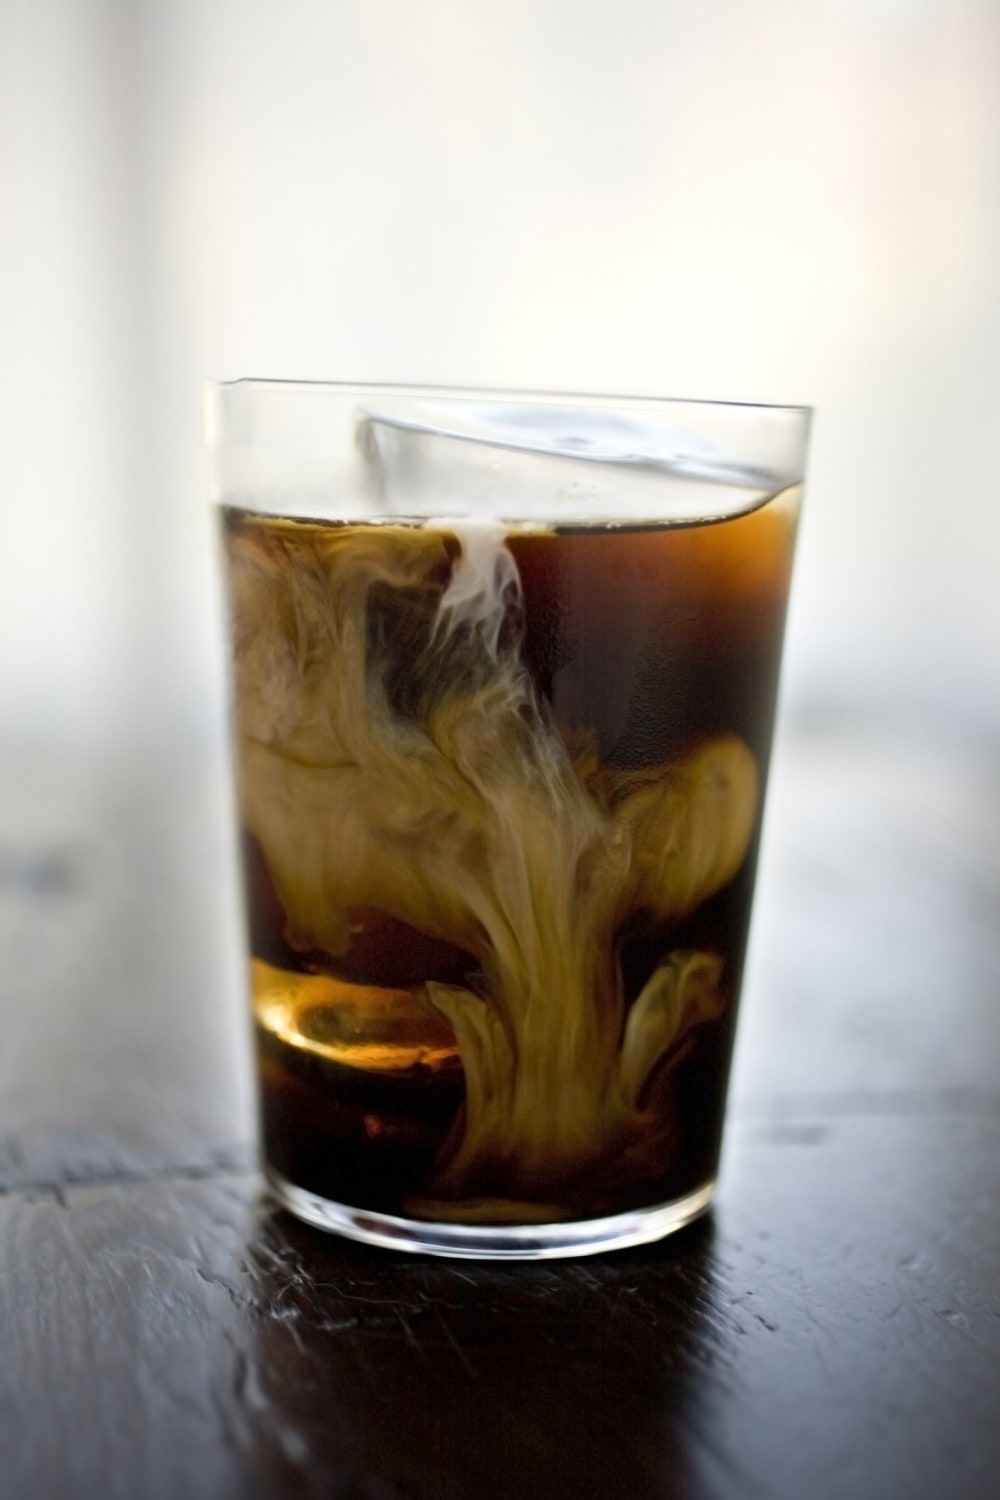 It's Easy to Make Your Own Kahlua at Home